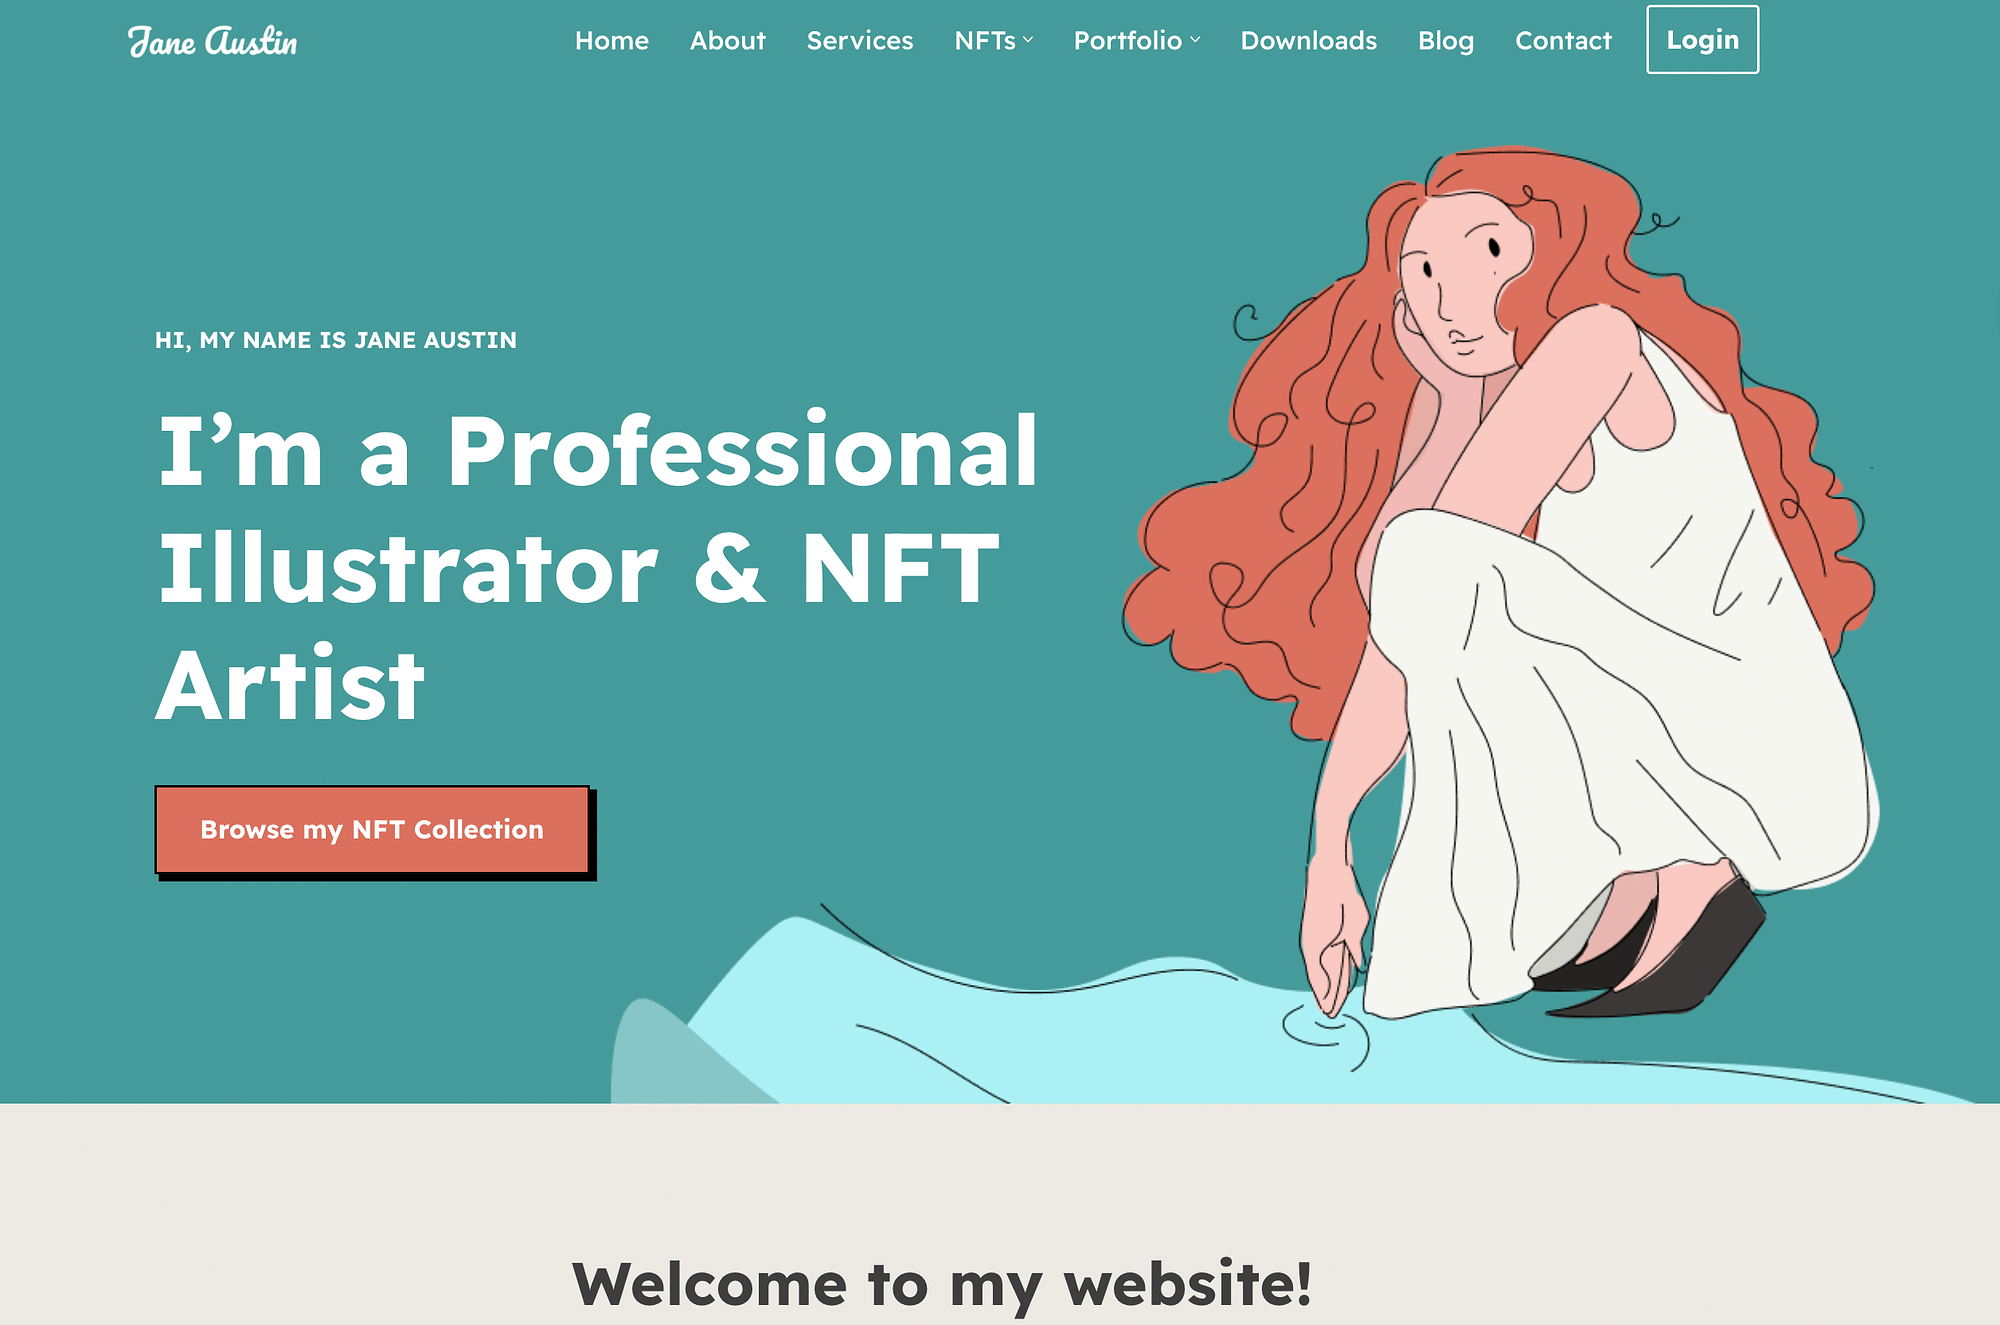 Neve theme's NFT Illustrator starter site, uses teal and orange, which is a strong color scheme for websites.